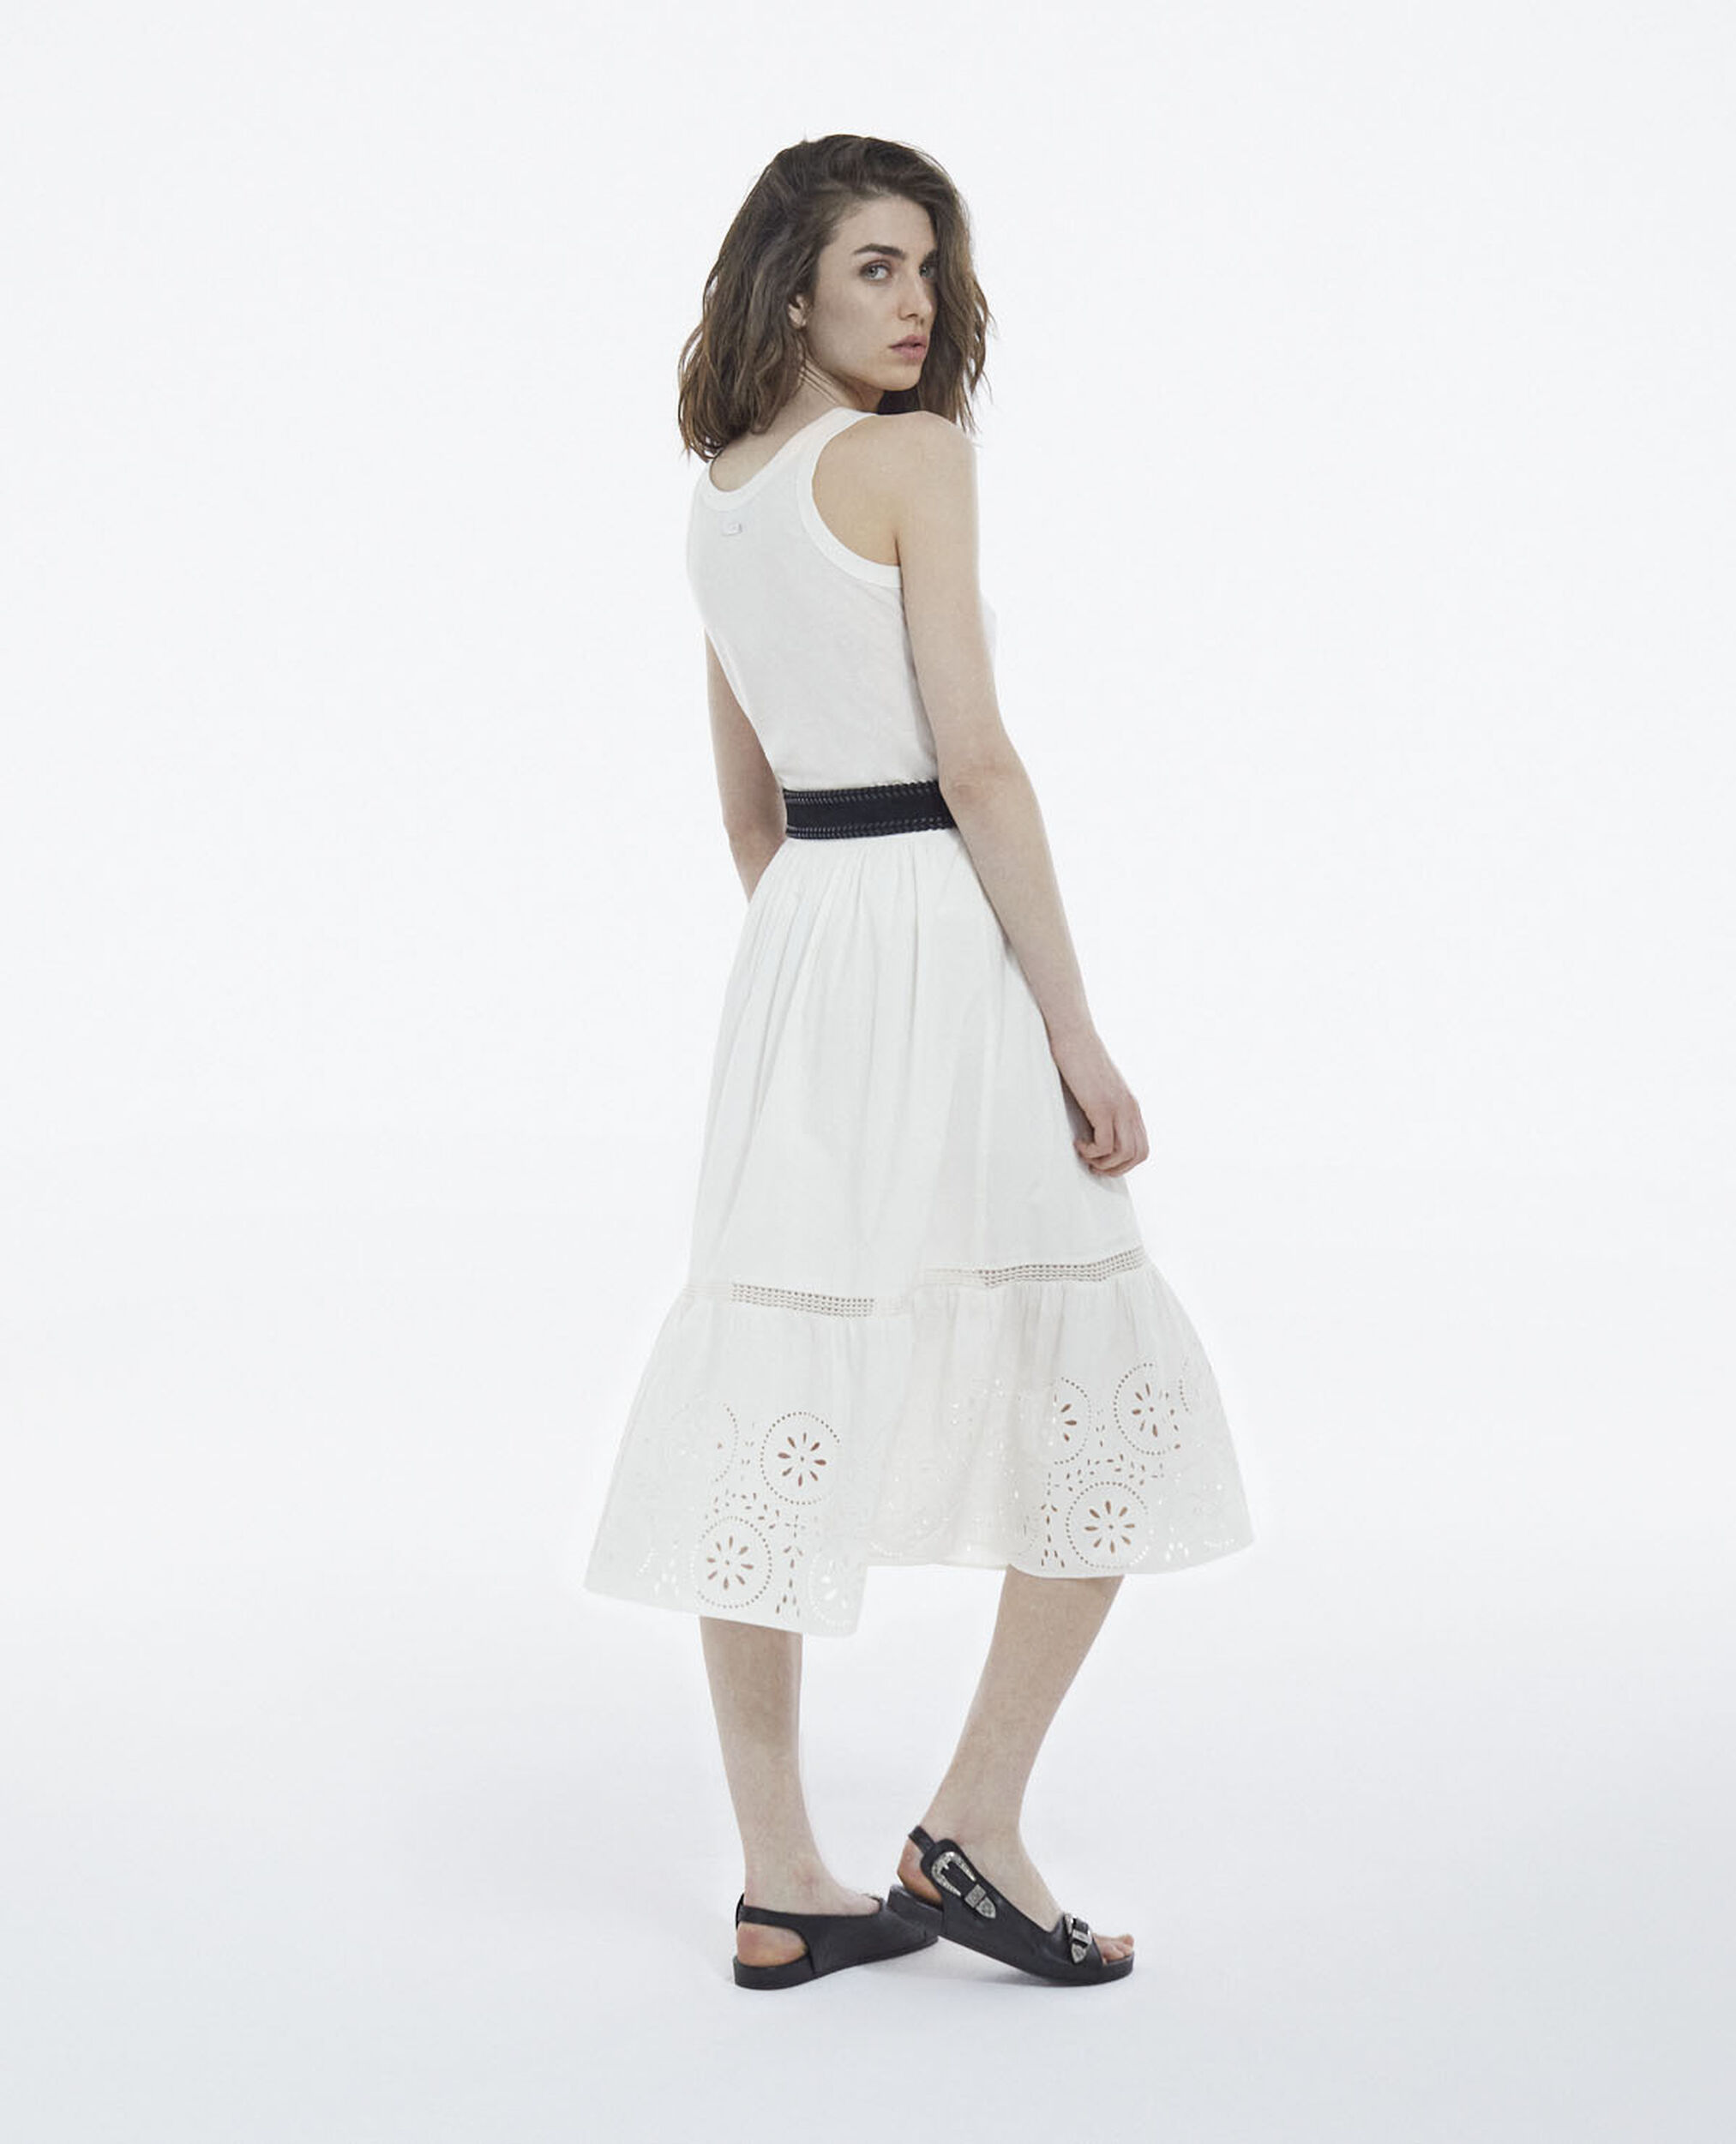 Long openwork white lace skirt, WHITE, hi-res image number null